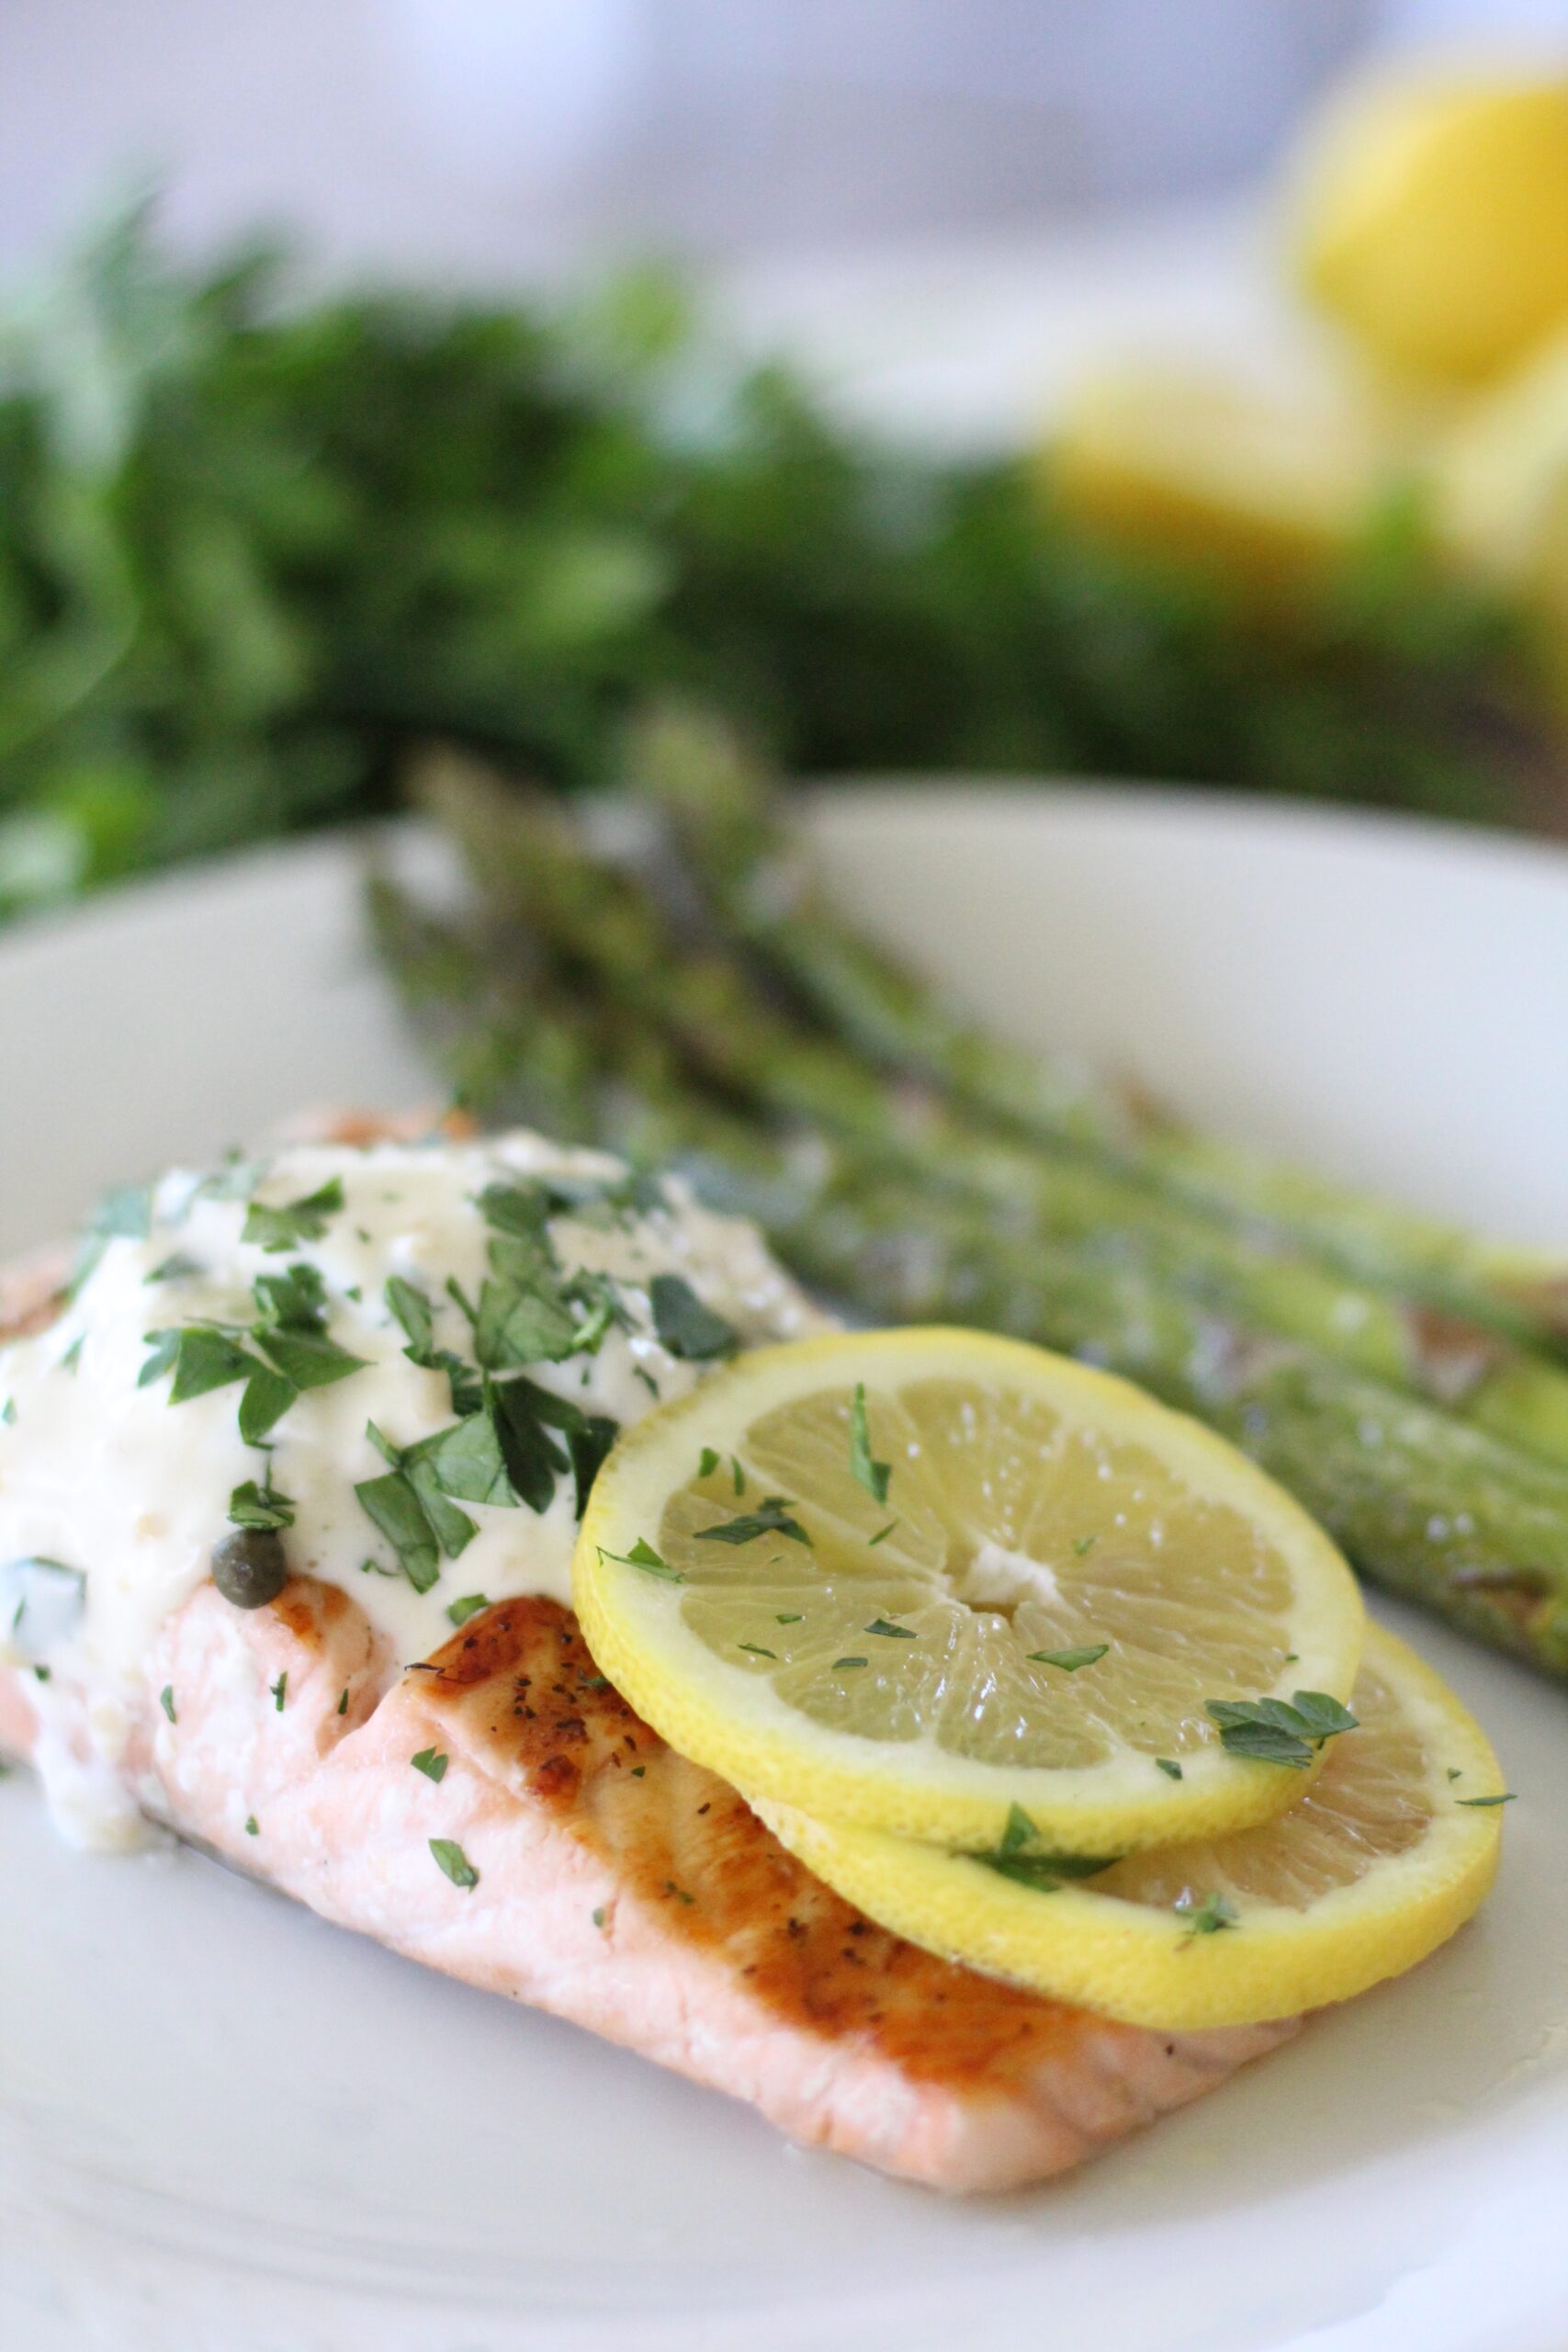 Pan seared Lemon and Herb Salmon with Garlic Aioli, herb goat cheese and asparagus